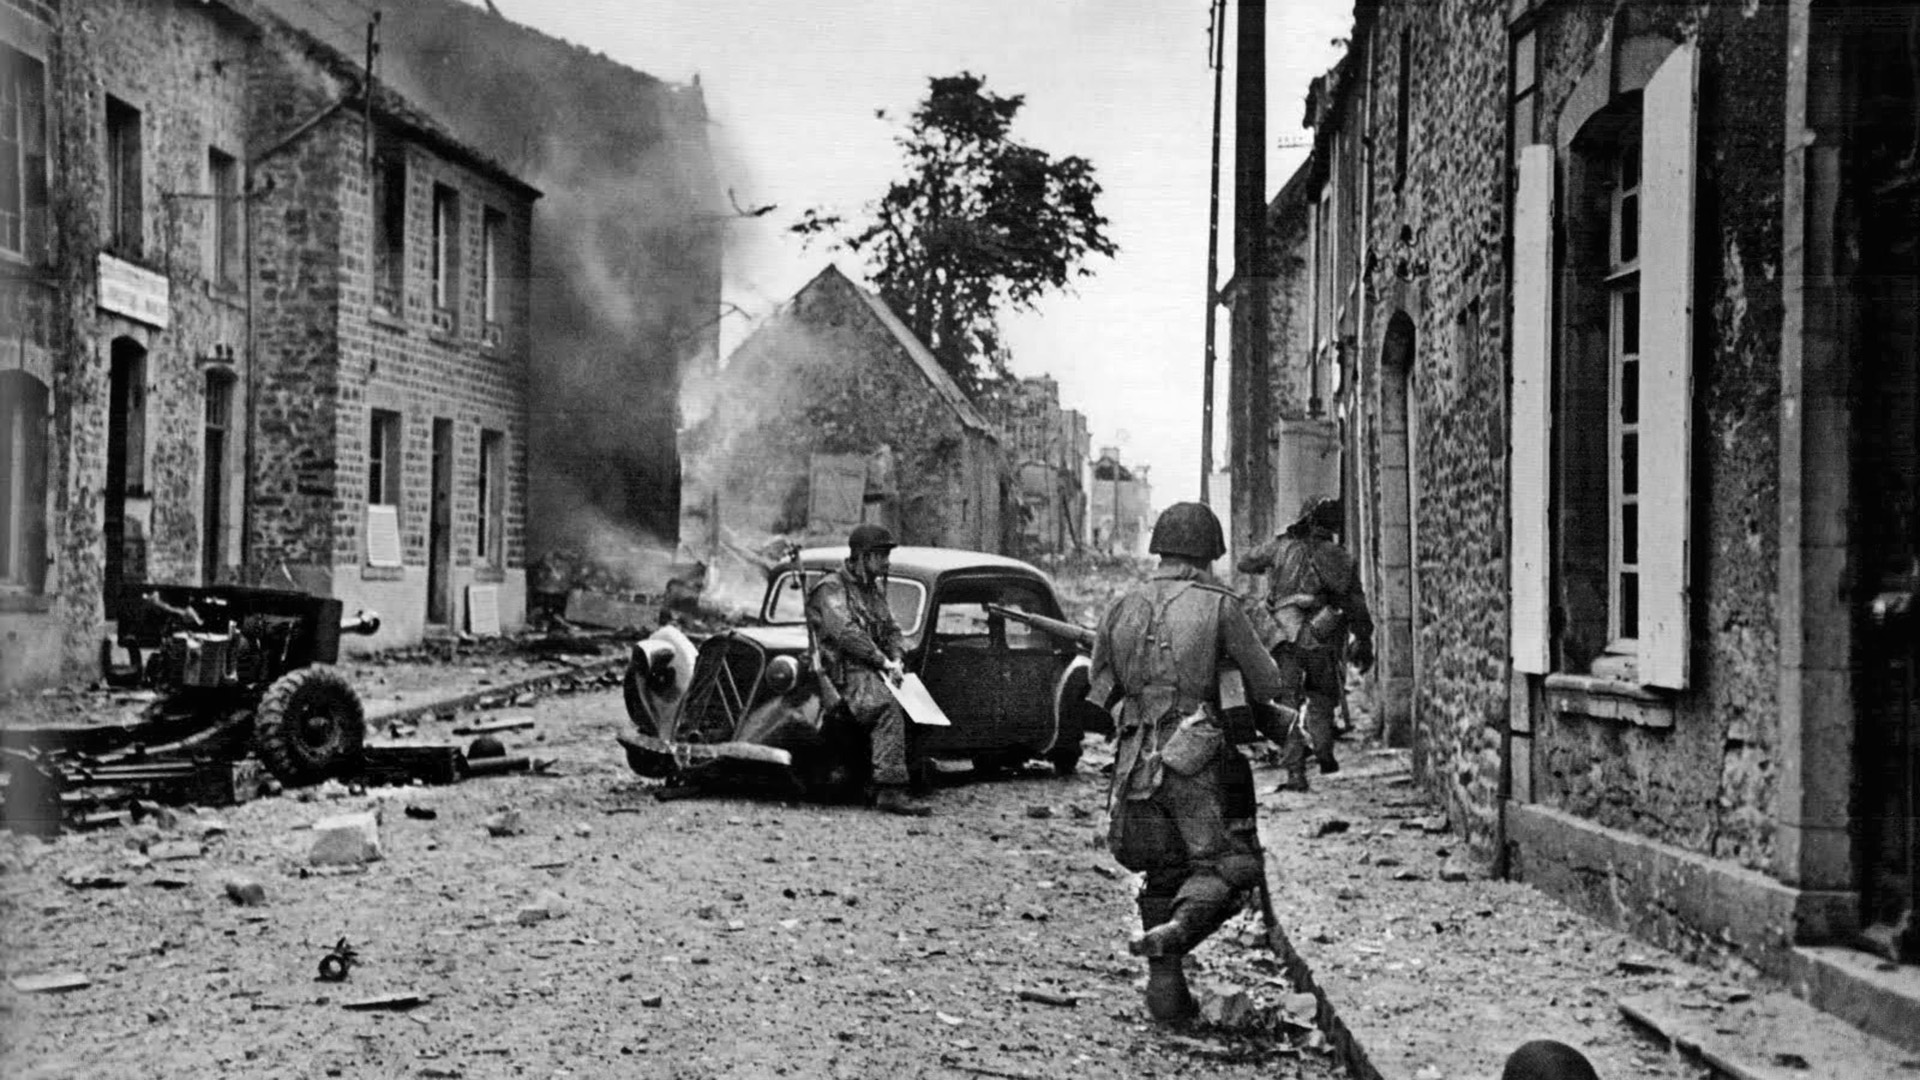 Disabled automobiles lie abandoned in the street of a French village south of the major port city of Cherbourg. In this image soldiers of the U.S. 82nd Airborne Division move cautiously through the area.